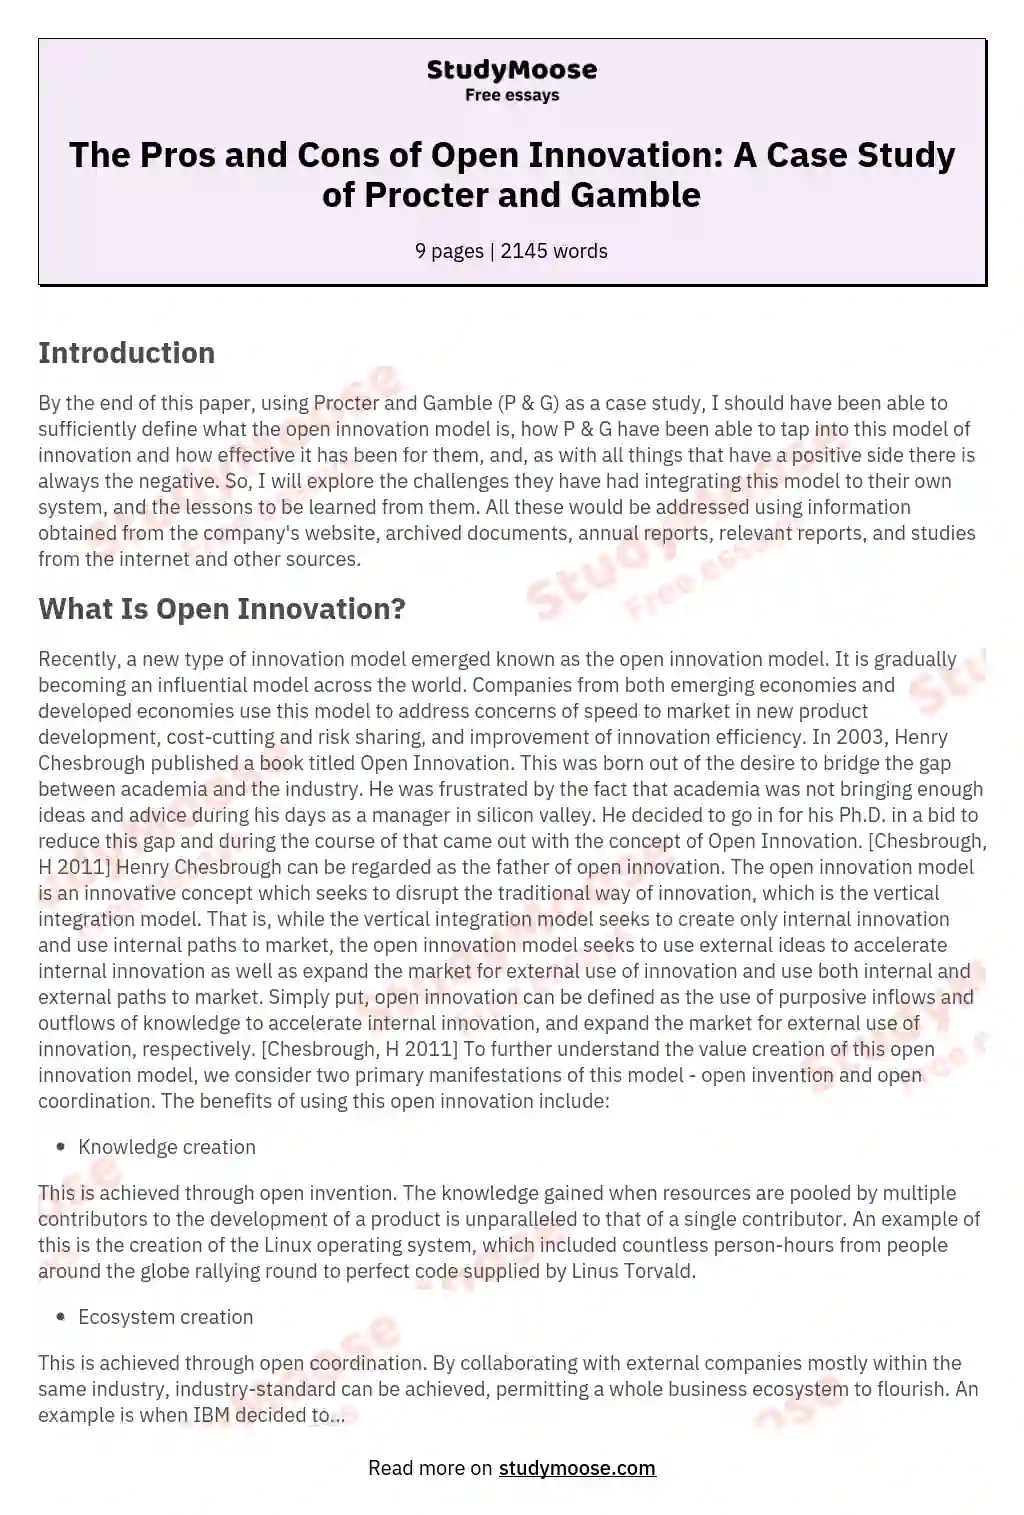 The Pros and Cons of Open Innovation: A Case Study of Procter and Gamble